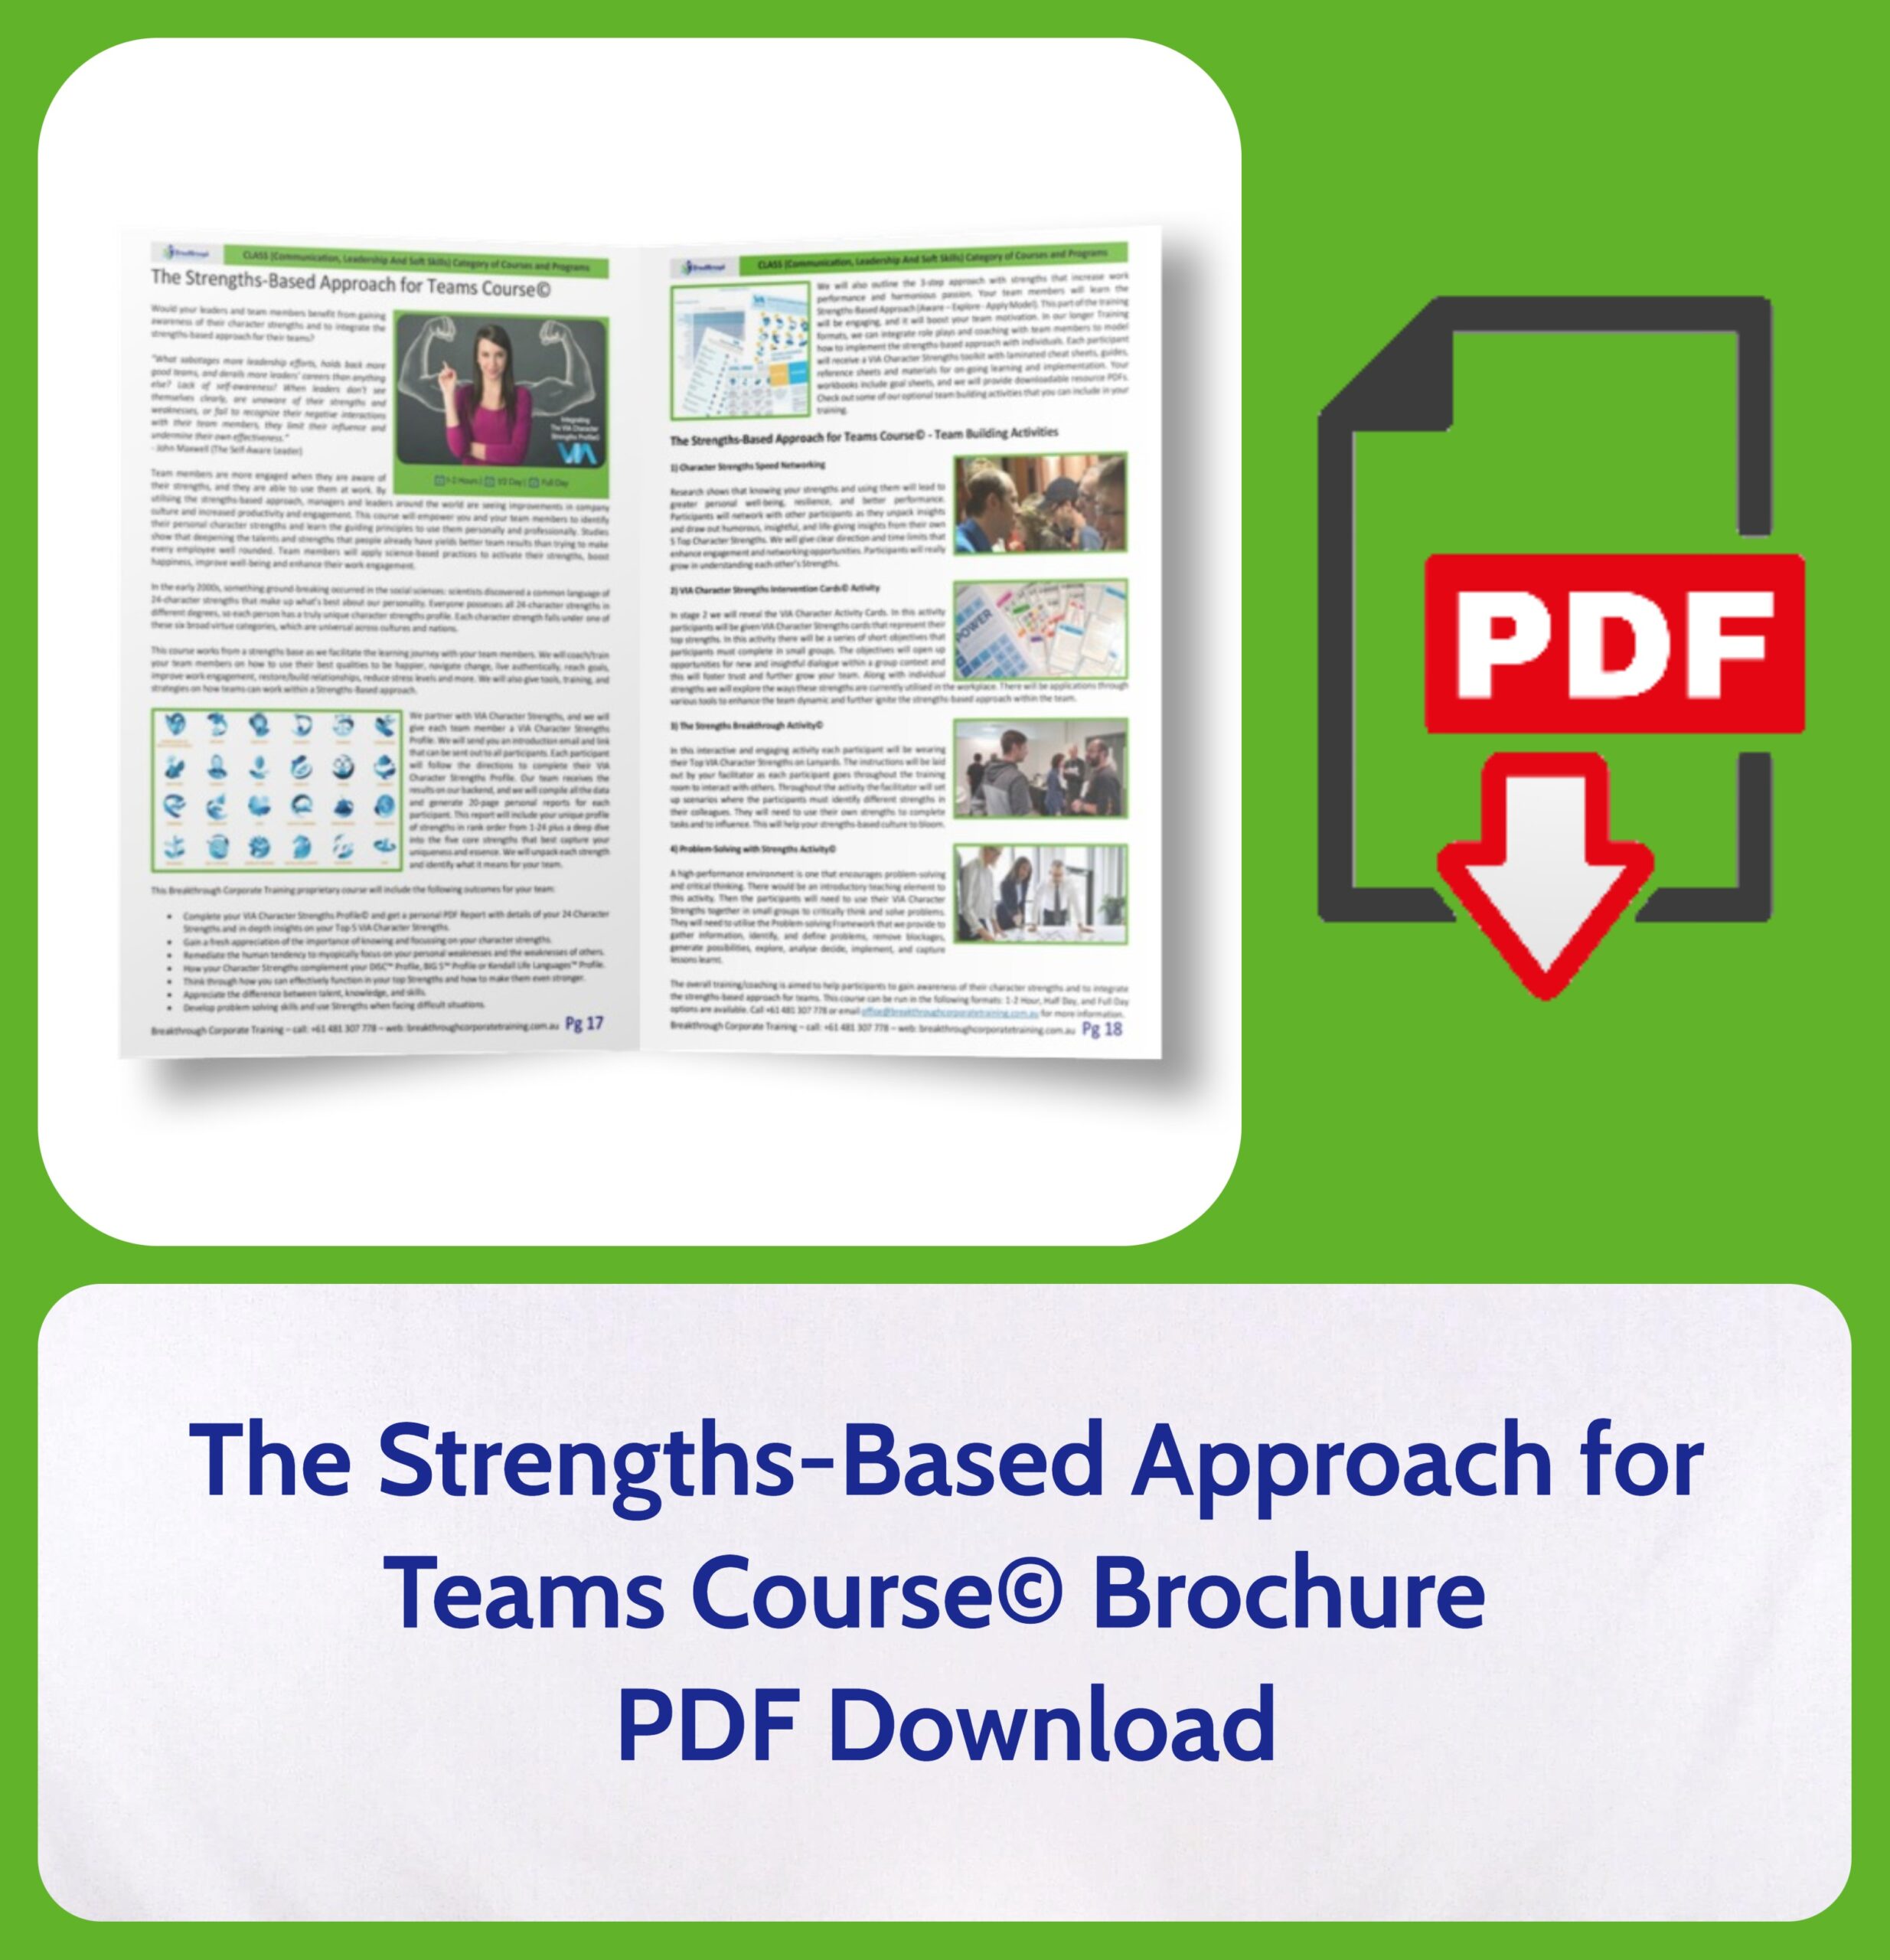 The Strengths-Based Approach for Teams Course